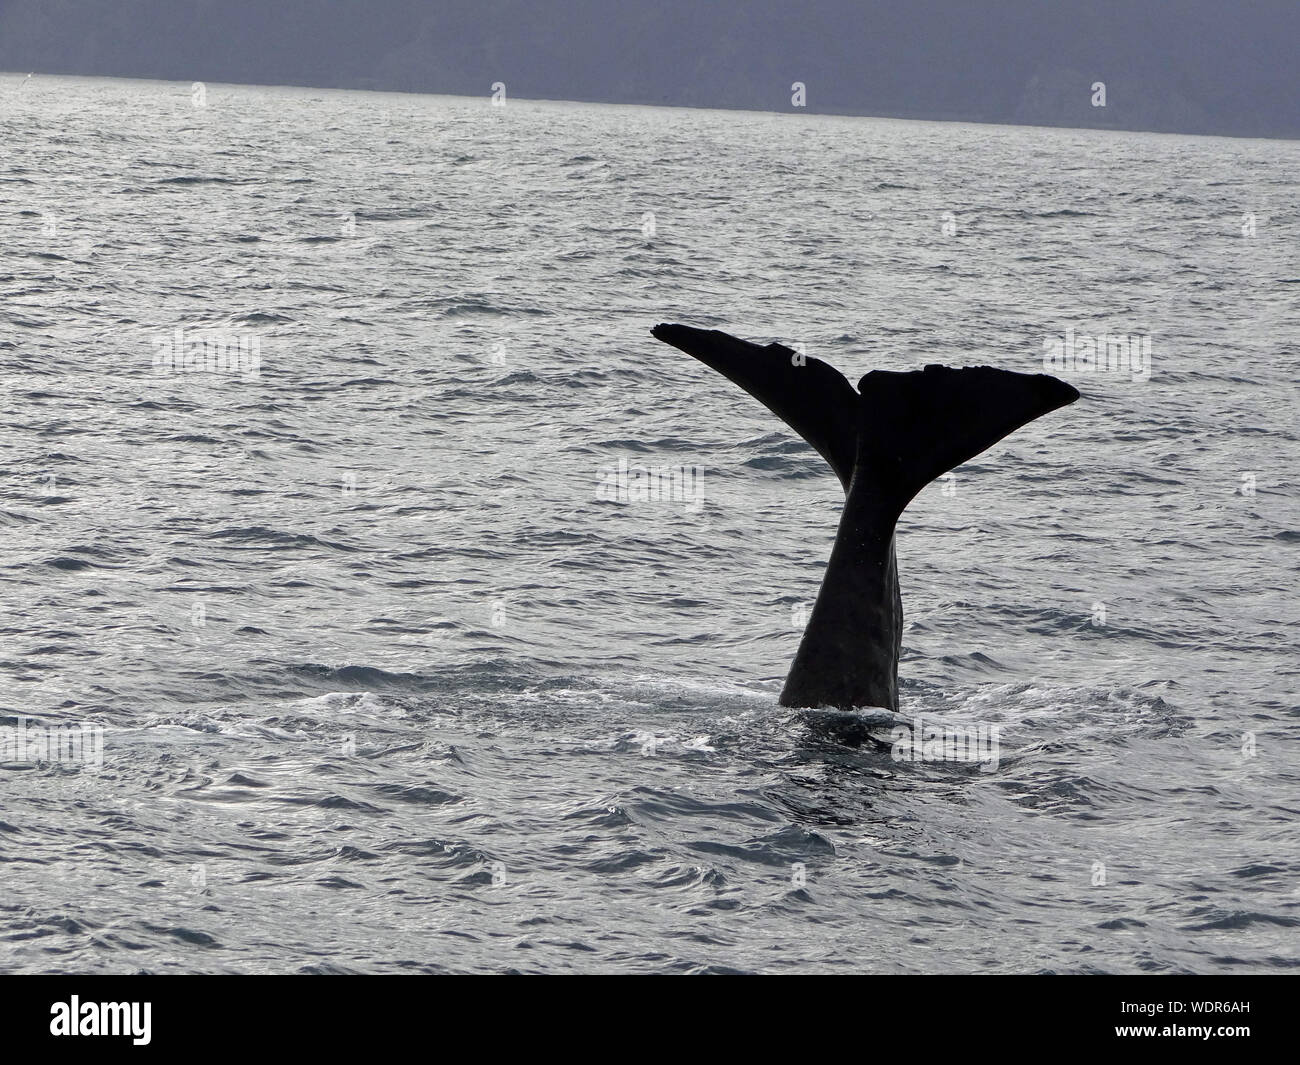 Humpback Whale Diving Into Sea Stock Photo